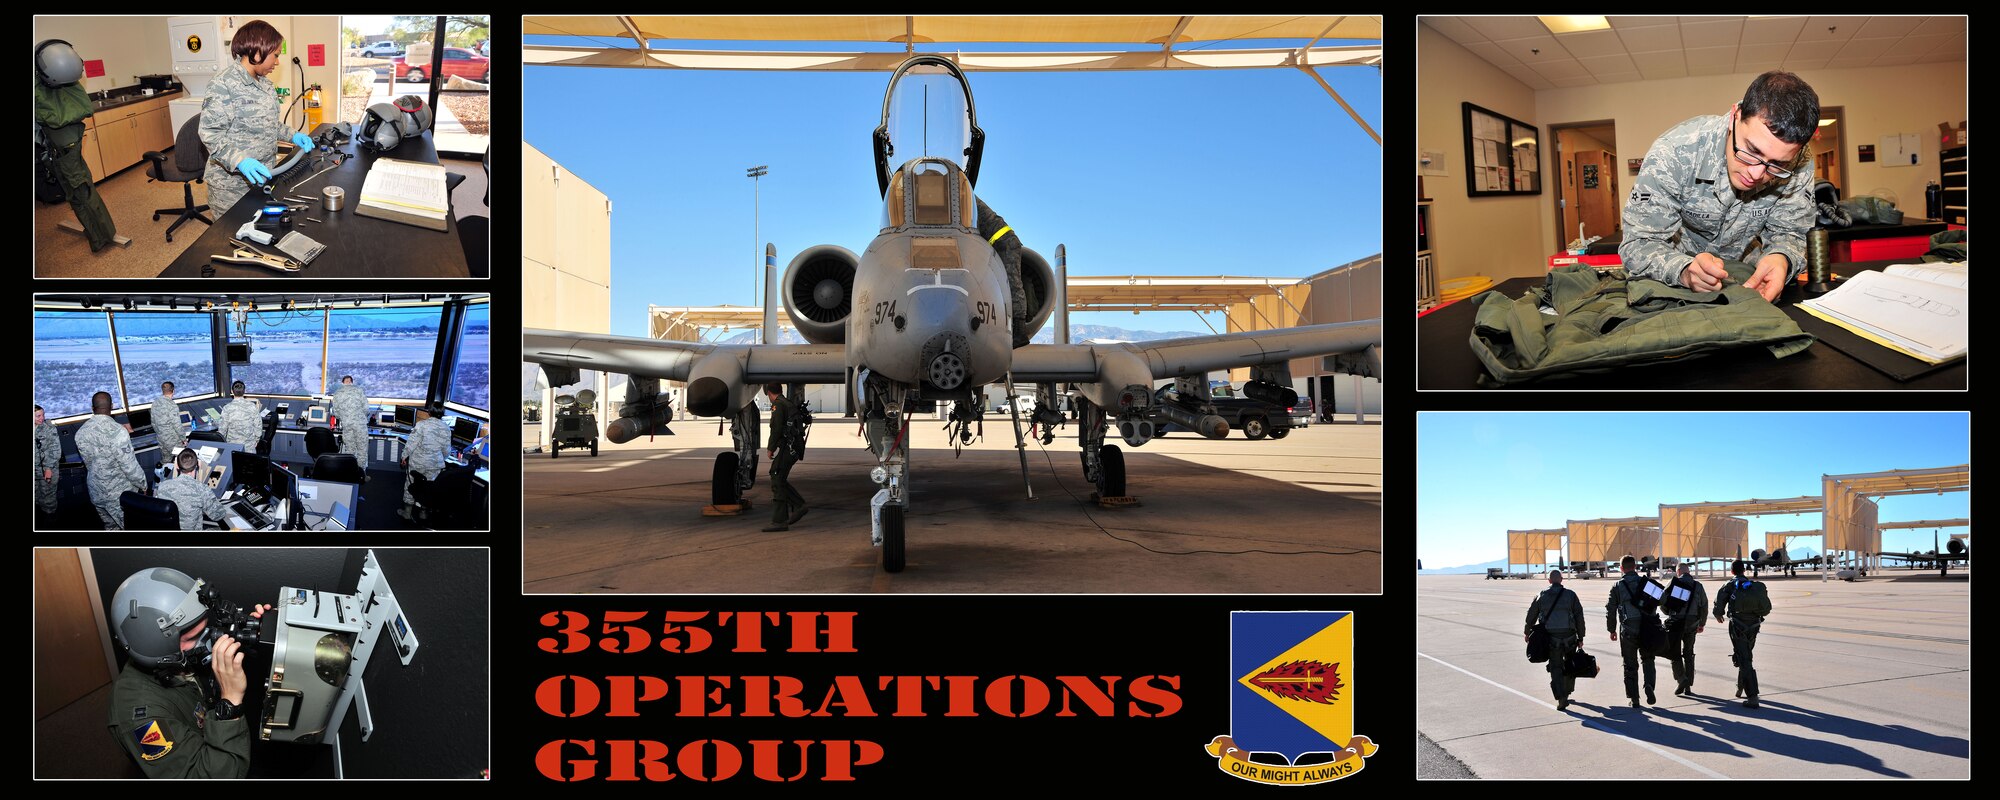 The 355th Operations Group consists of five squadrons and over 300 personnel employing 83 A-10C aircraft and an AN/TPS-75 radar system. It provides war-fighters with forces for close air support, forward air control, combat search and rescue.